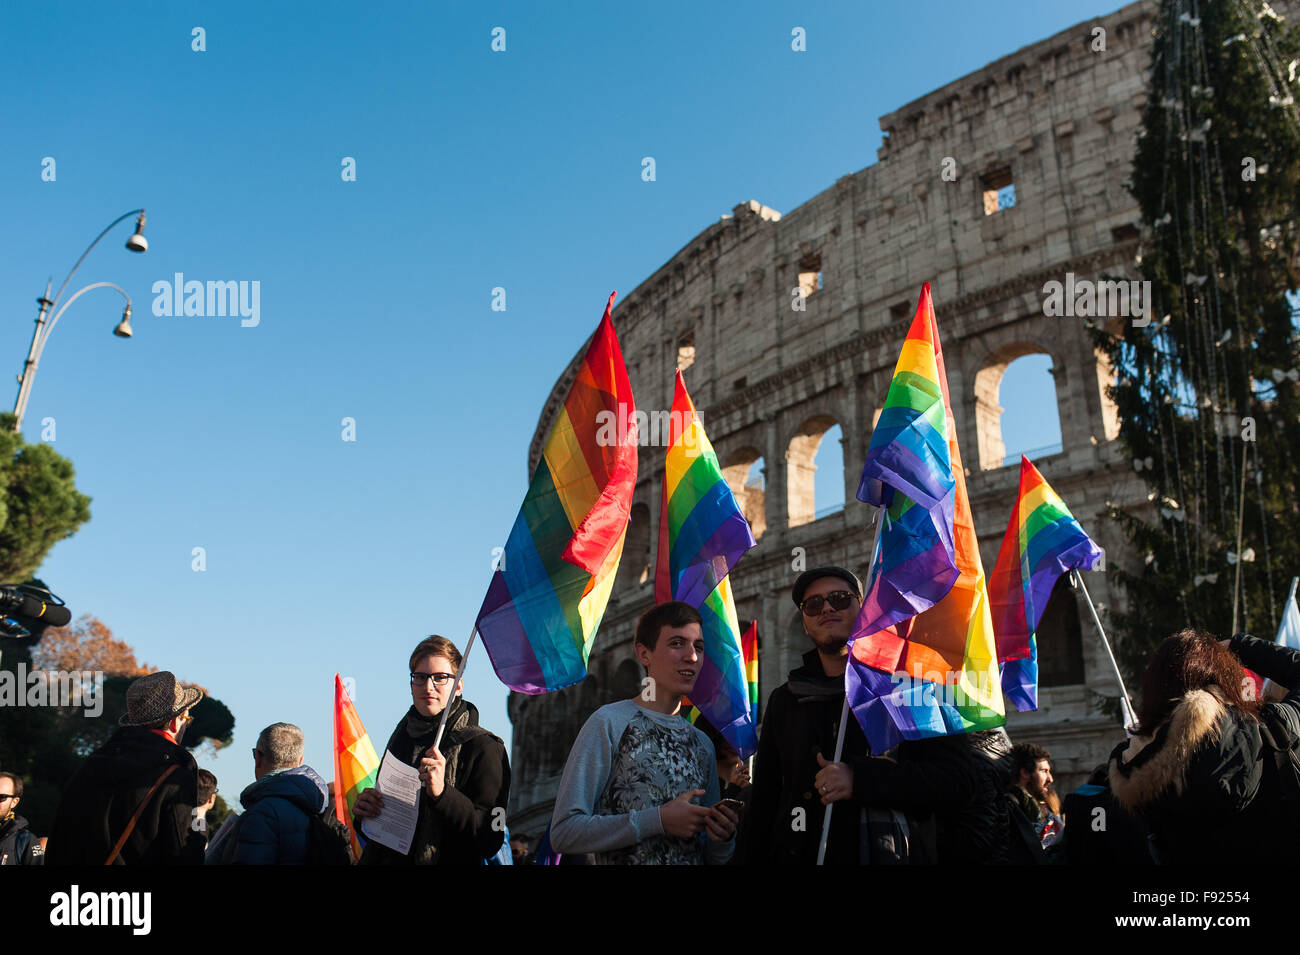 People march for gay and lgbt rights in rome with rainbows flags Stock ...